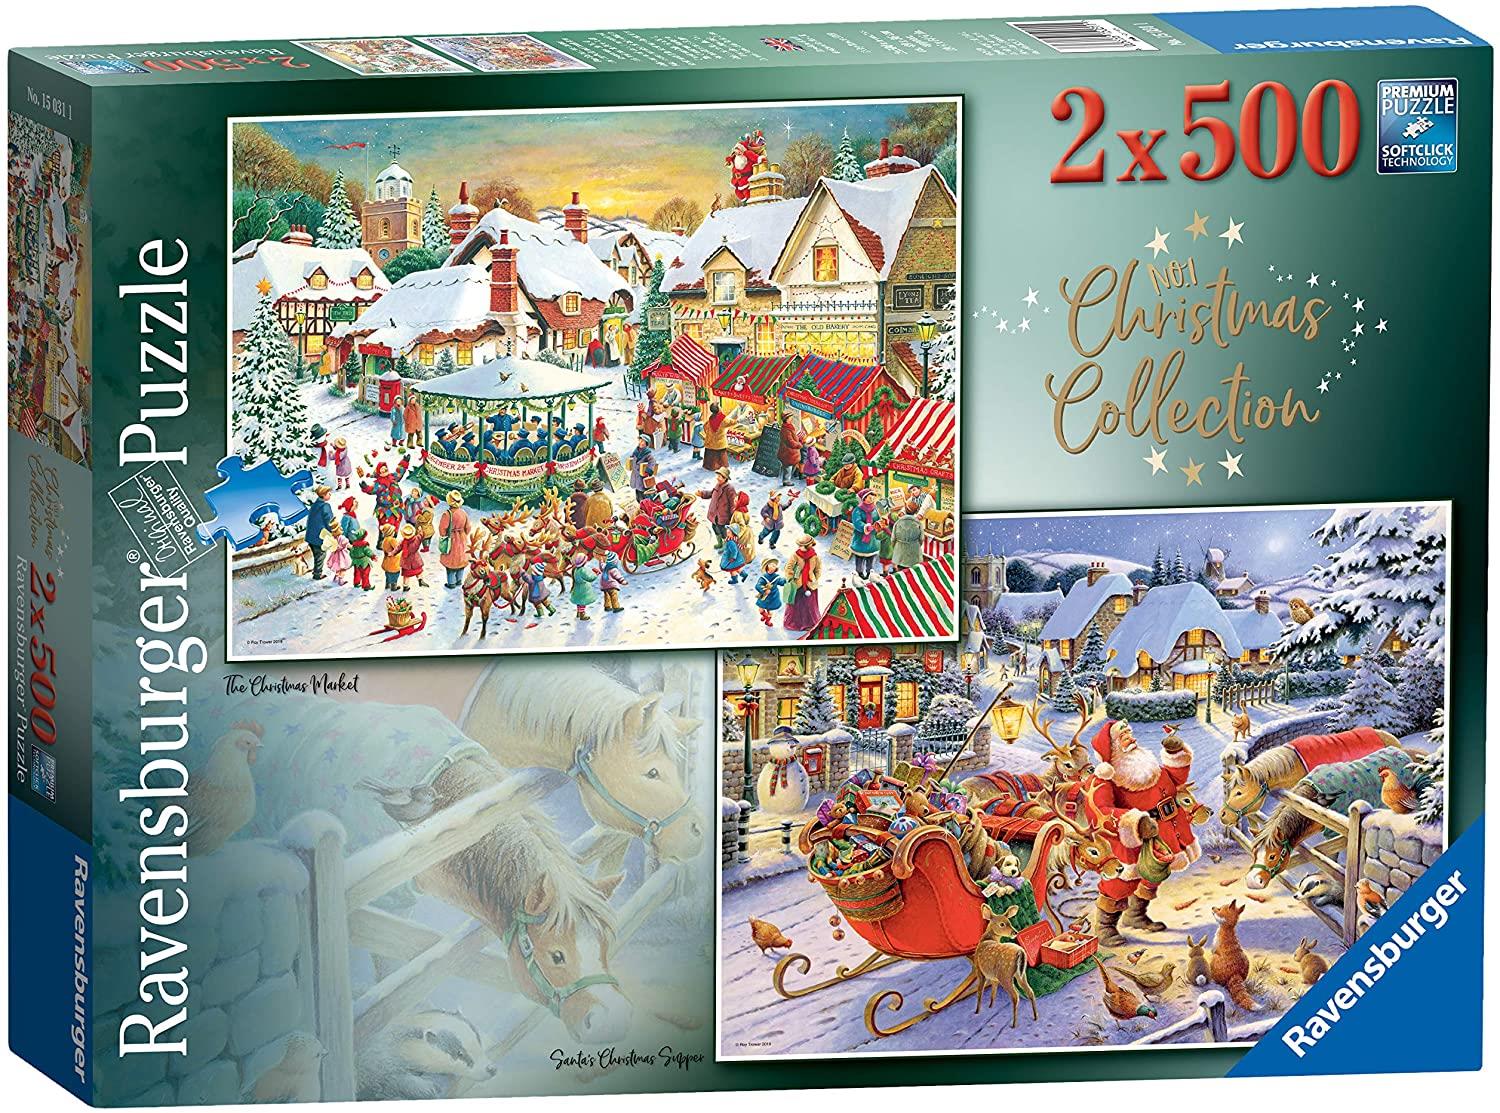 Ravensburger Christmas Collection No. 1 Jigsaw Puzzles (2 x 500 Pieces)